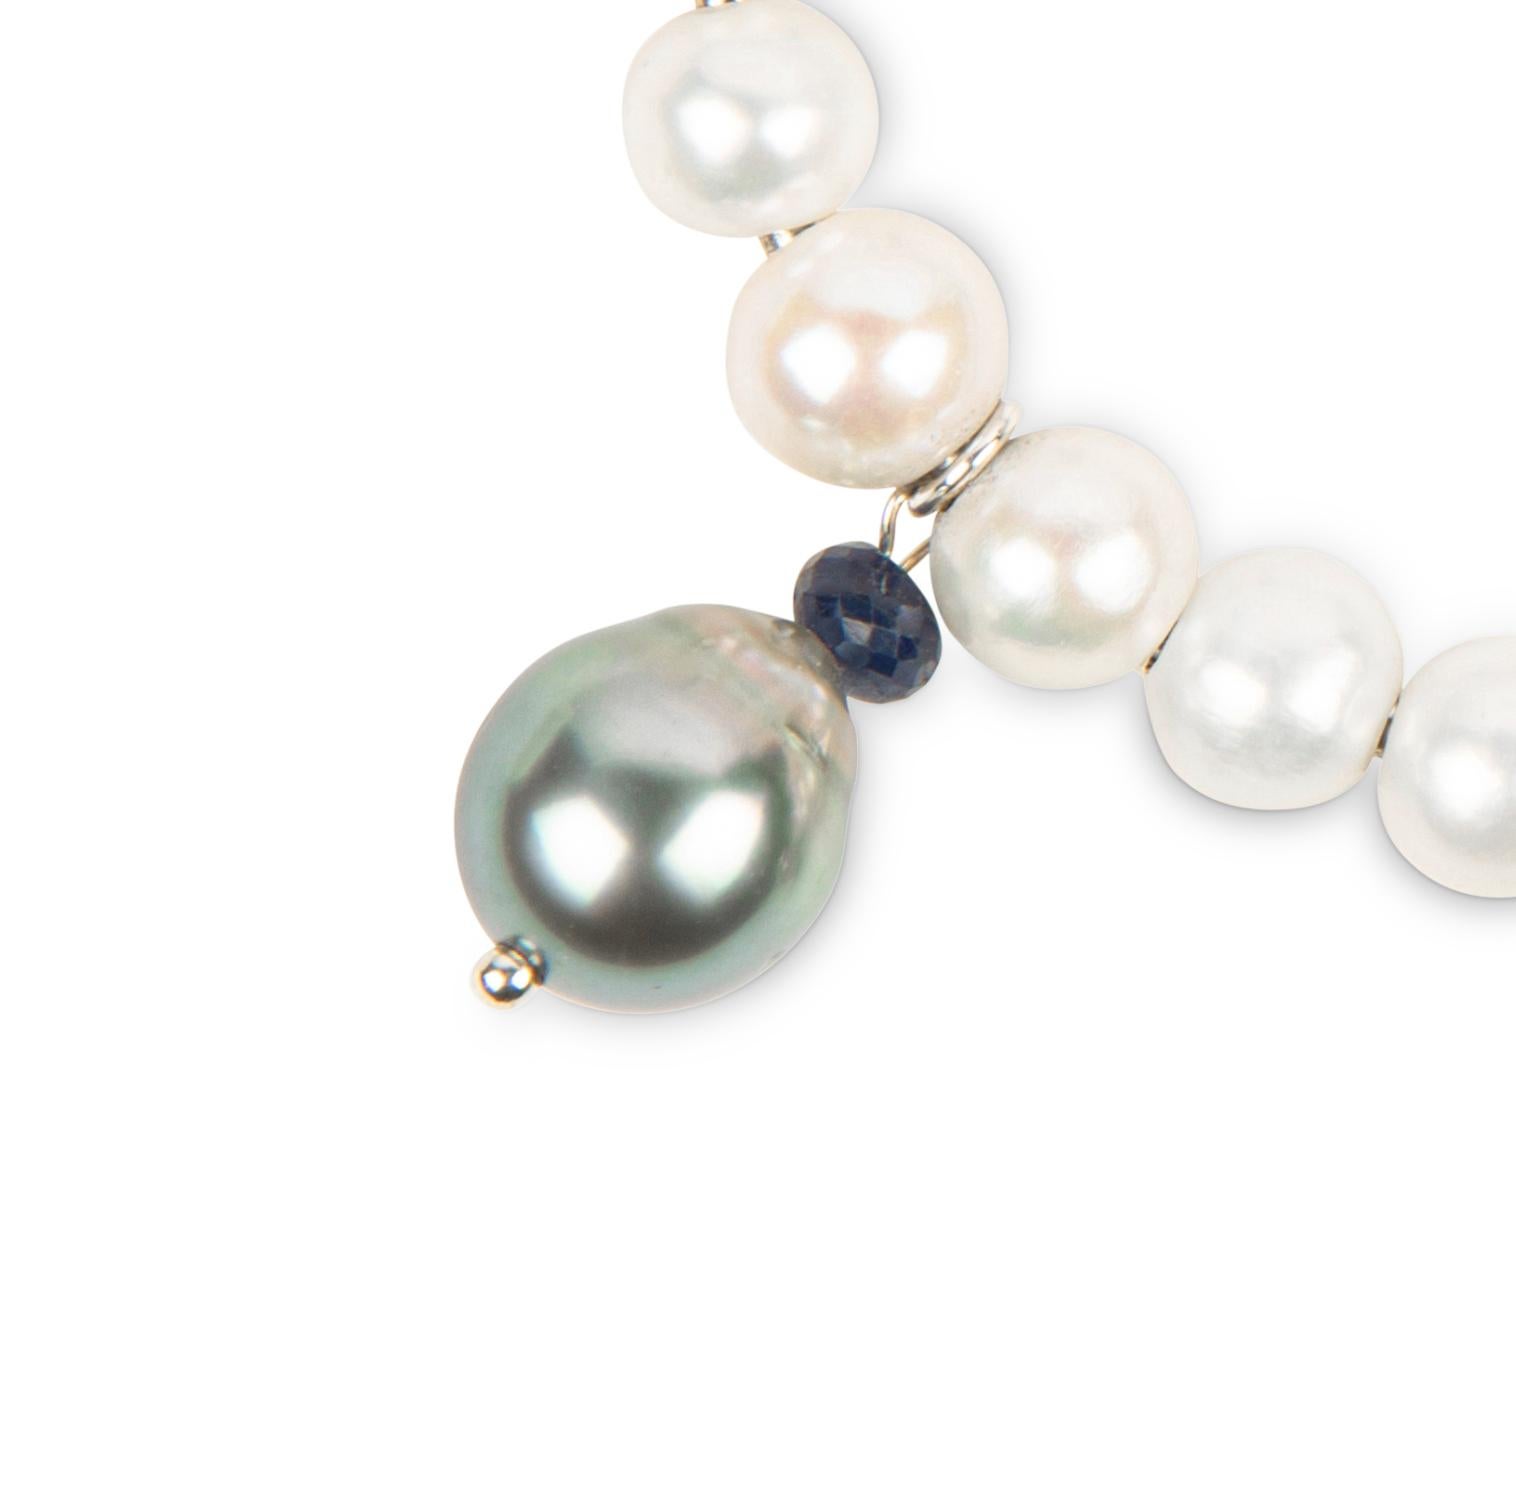 Women's Cuff with white freshwater pearls, Tahiti pearls and gemstones For Sale